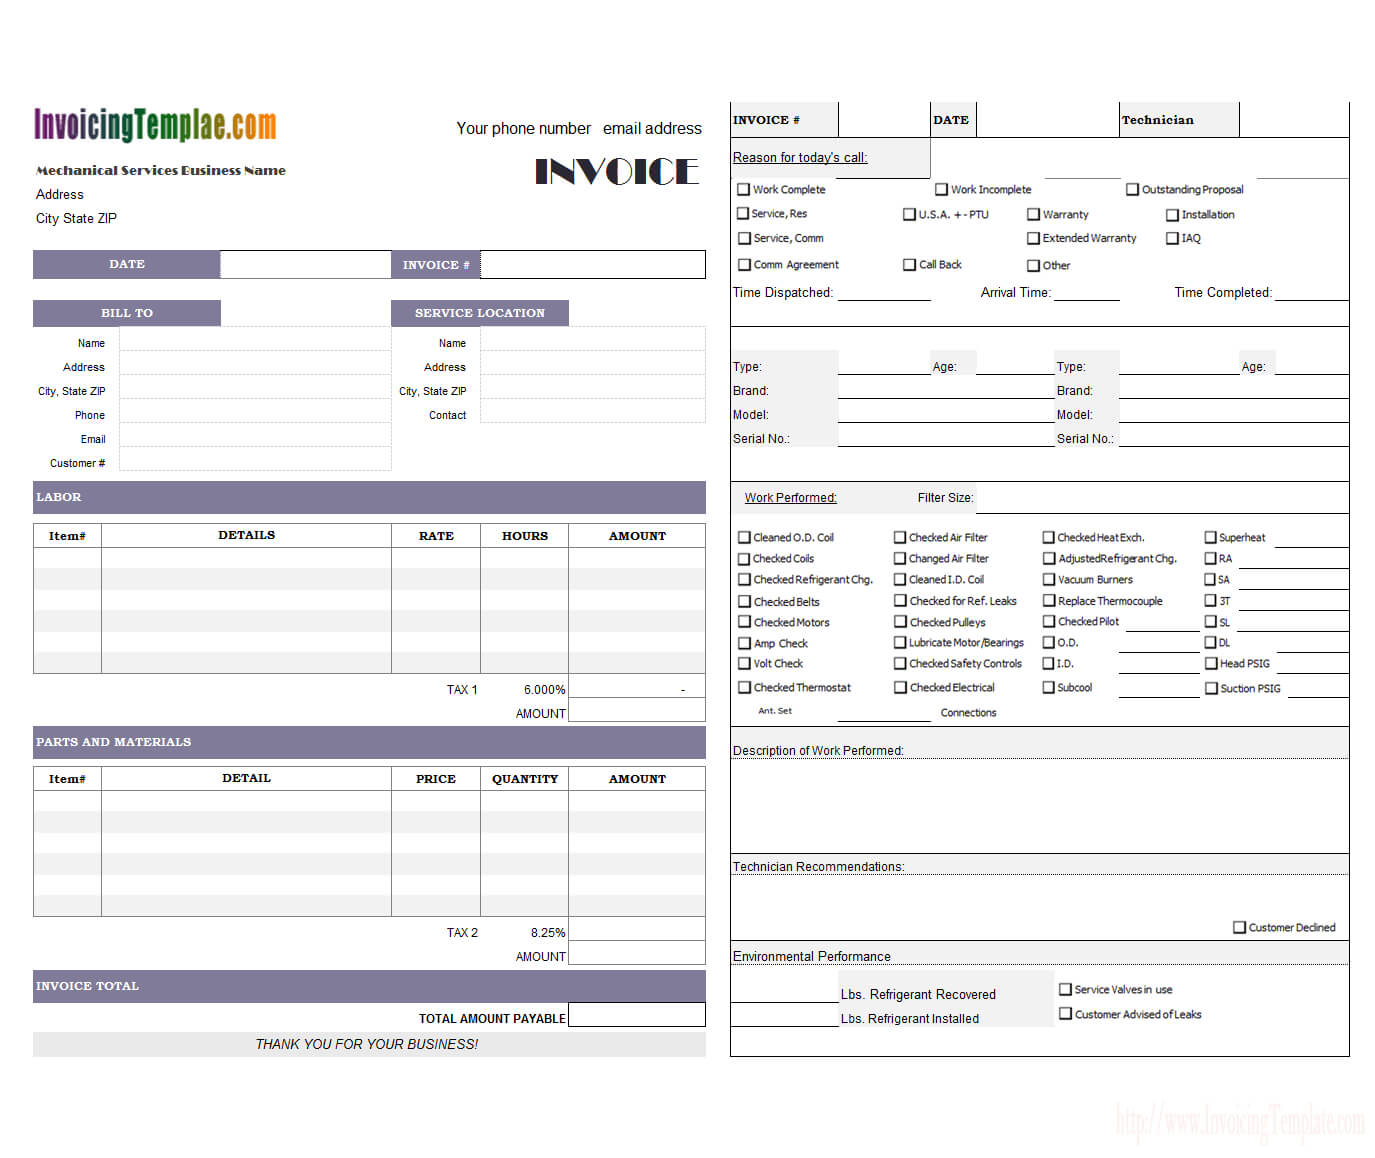 Hvac Service Invoice In Air Conditioning Invoice Template